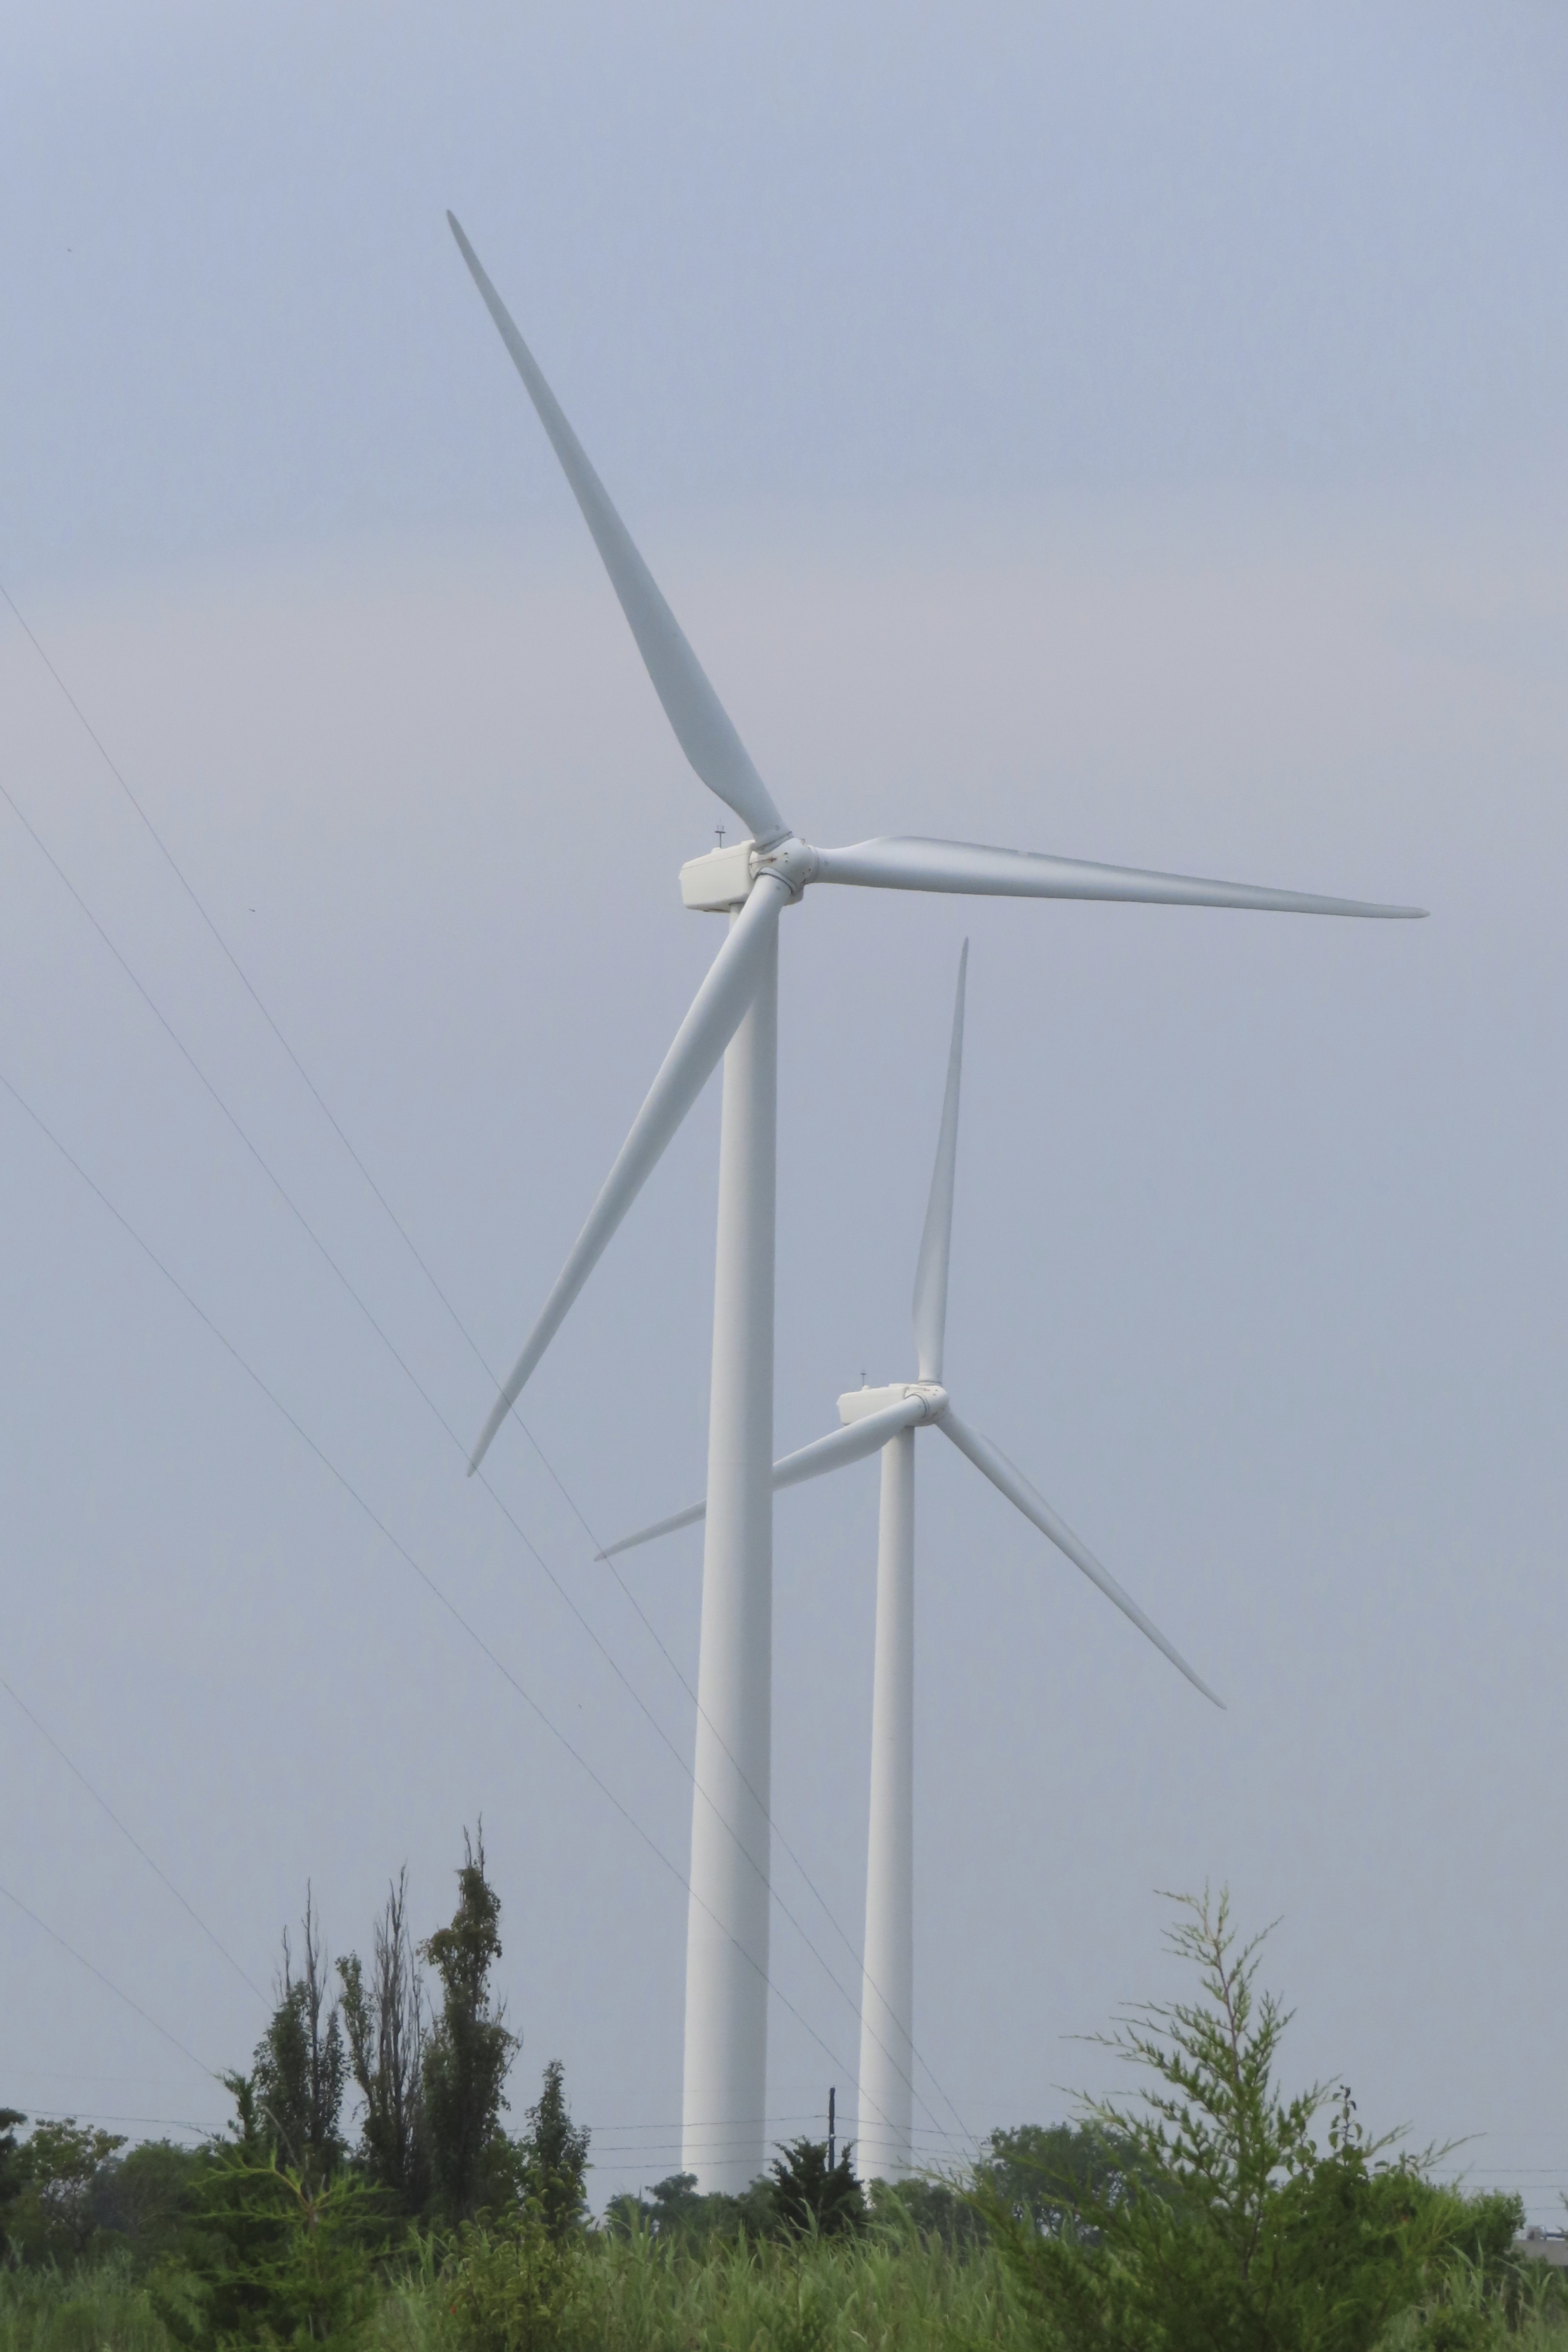 Wind industry deals with blowback from Orsted scrapping 2 wind power  projects in New Jersey